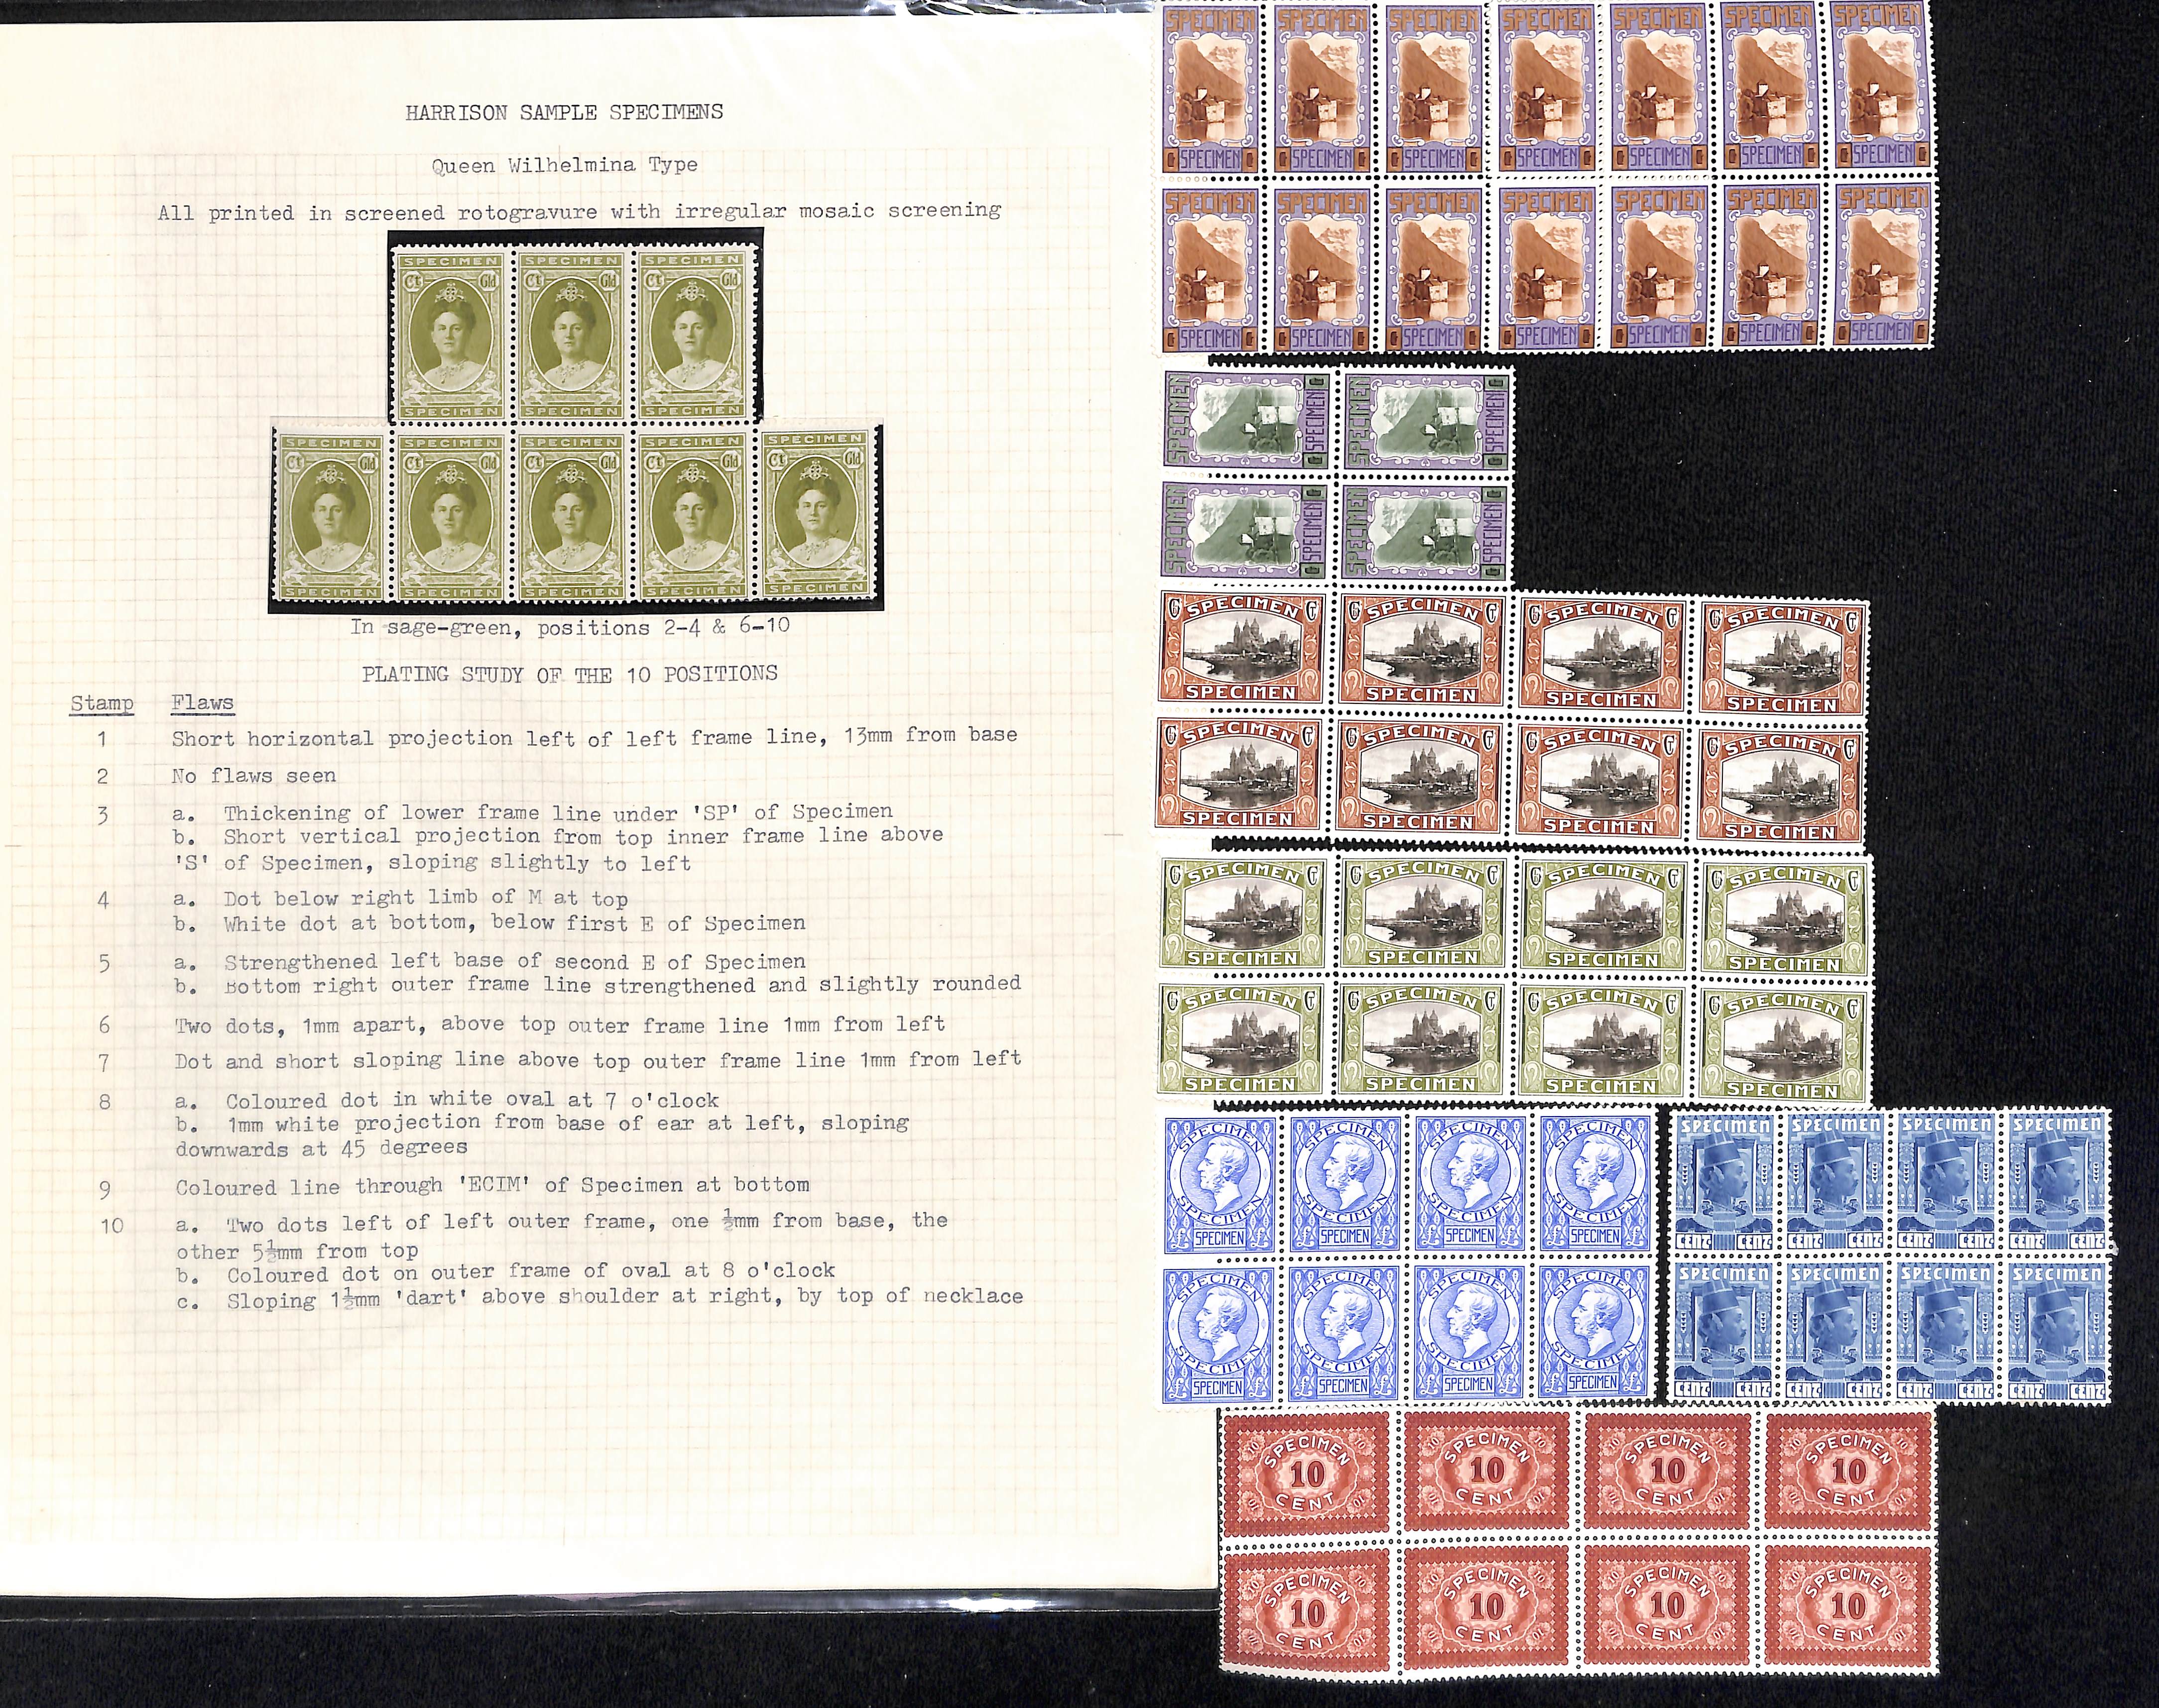 c.1923 Harrison & Sons sample stamps inscribed "SPECIMEN", all perforated, some watermarked, designs - Image 2 of 2